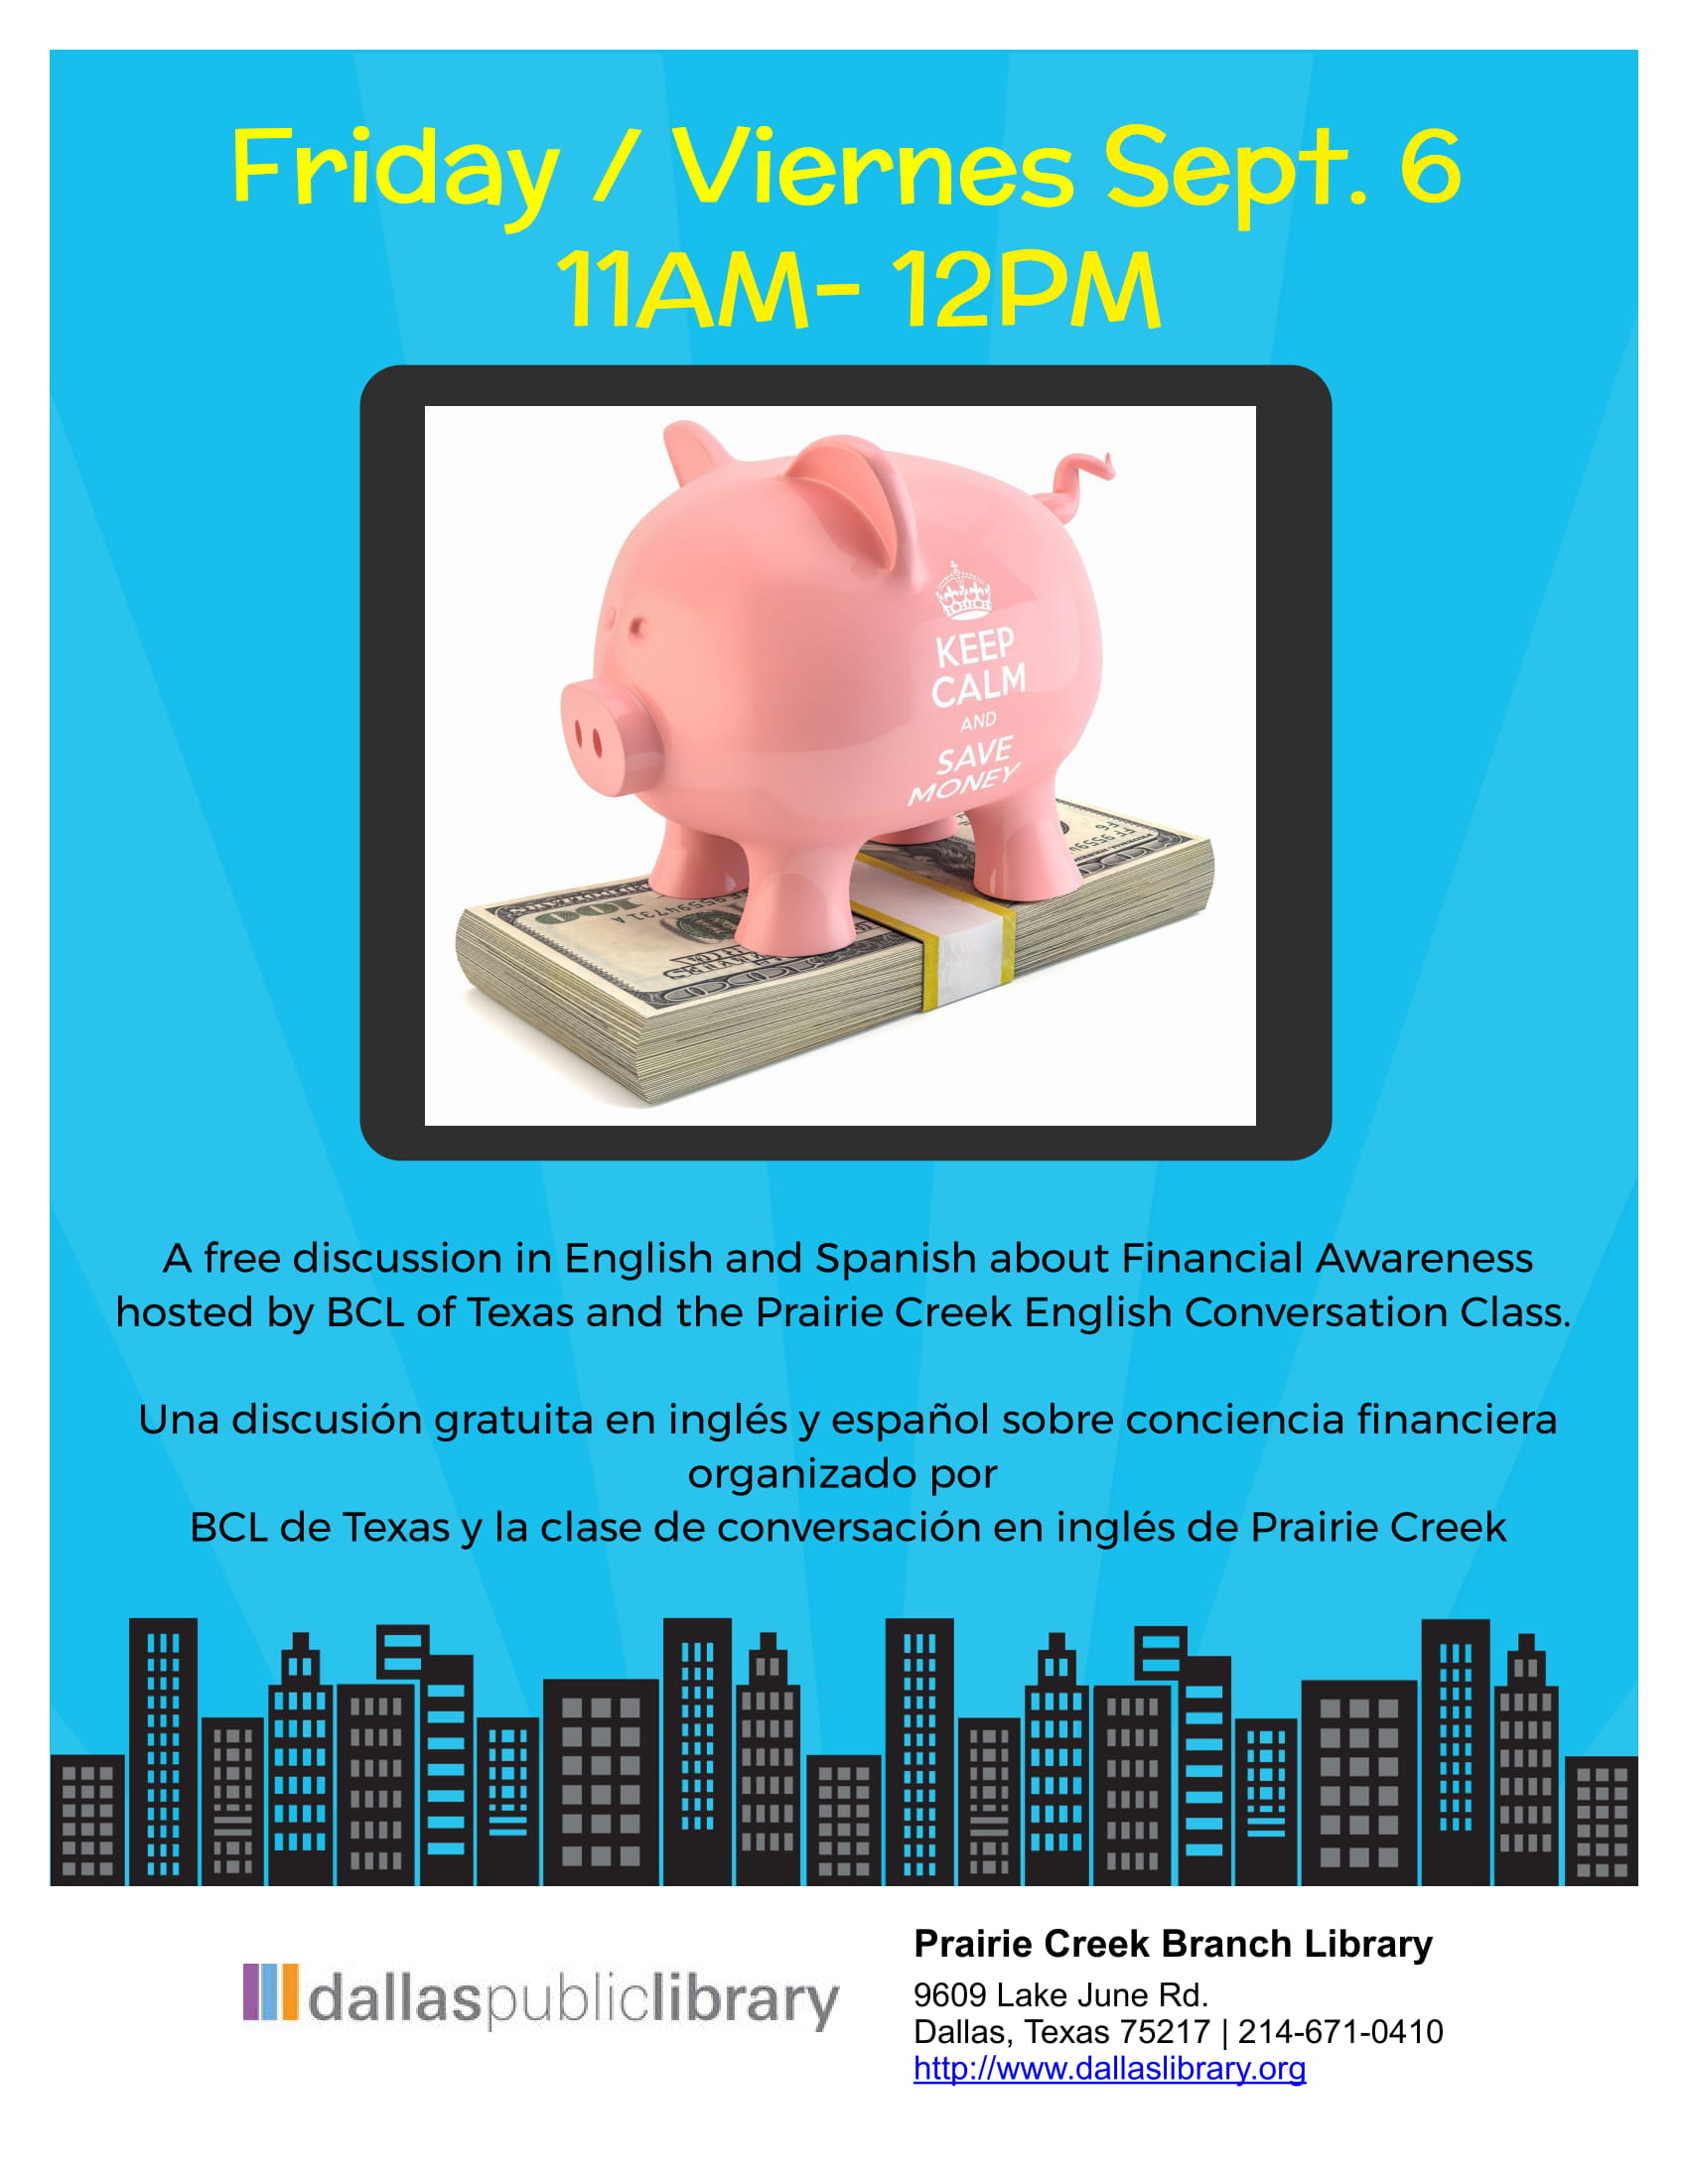 Free discussion about financial awareness in English and Spanish Friday Sept, 6